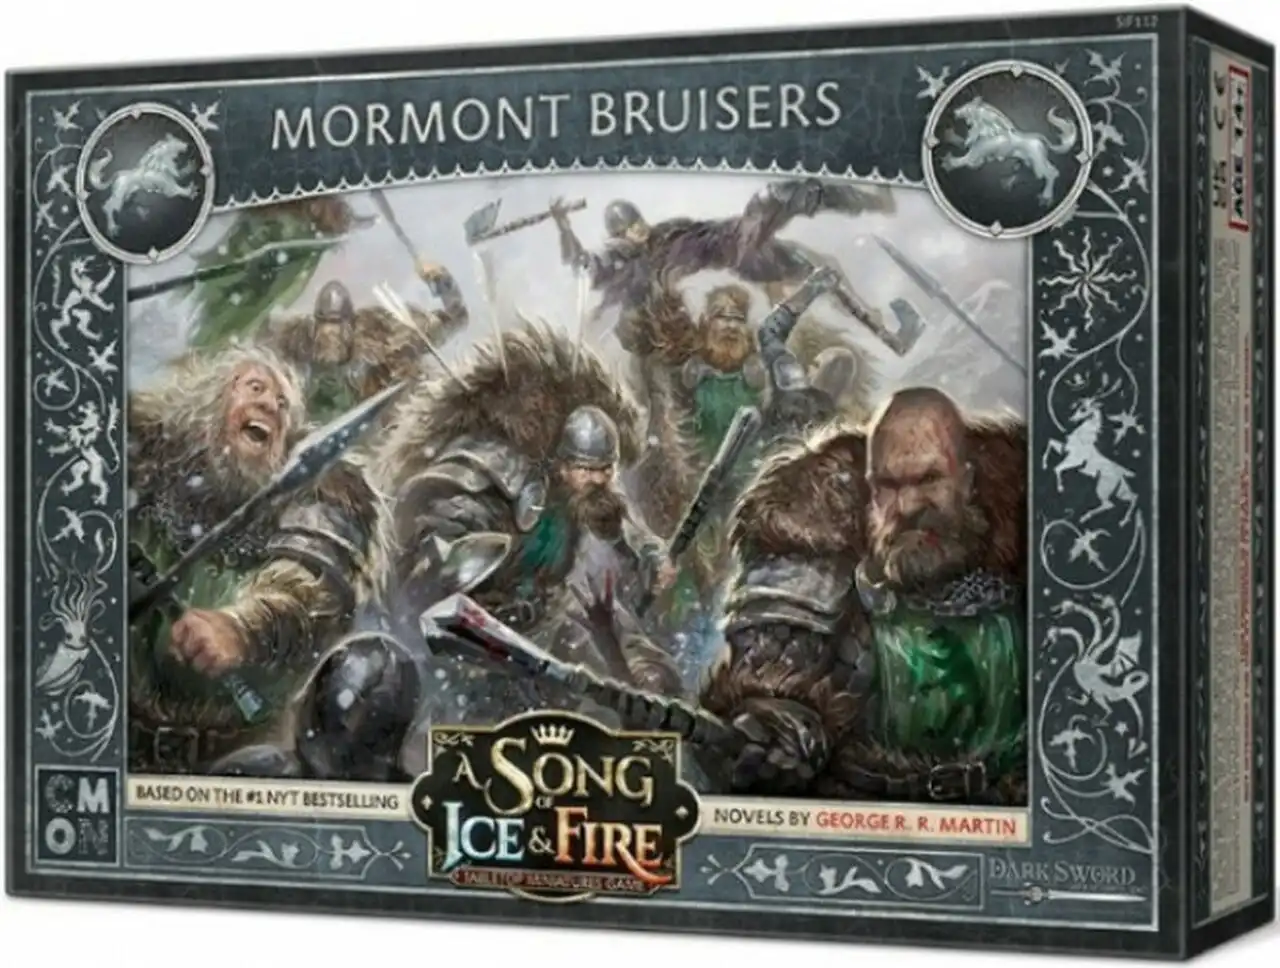 A Song of Ice and Fire Mormont Bruisers Unit Box